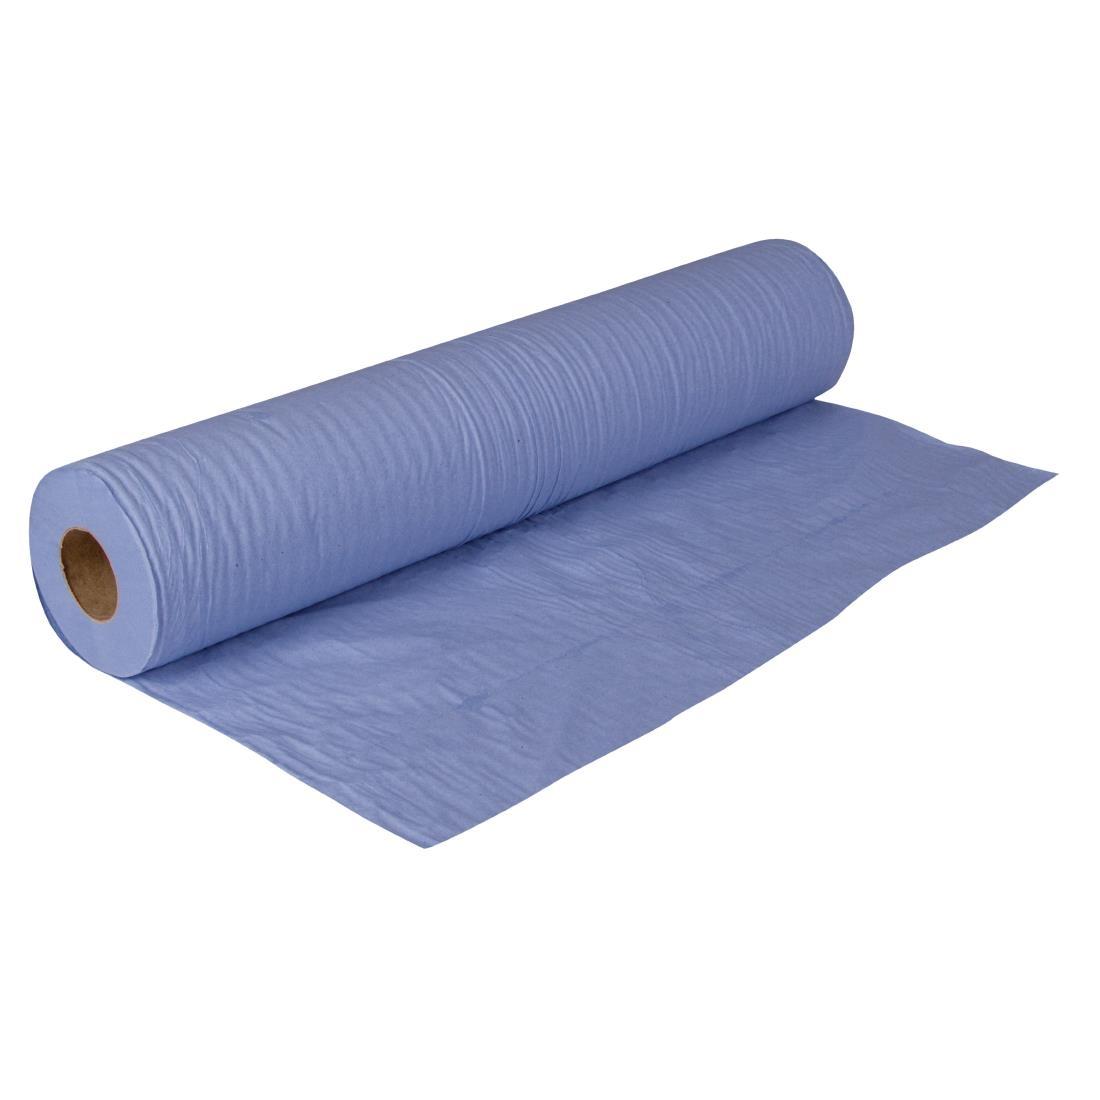 Jantex Blue Couch Rolls (Pack of 12) - GH189  - 1